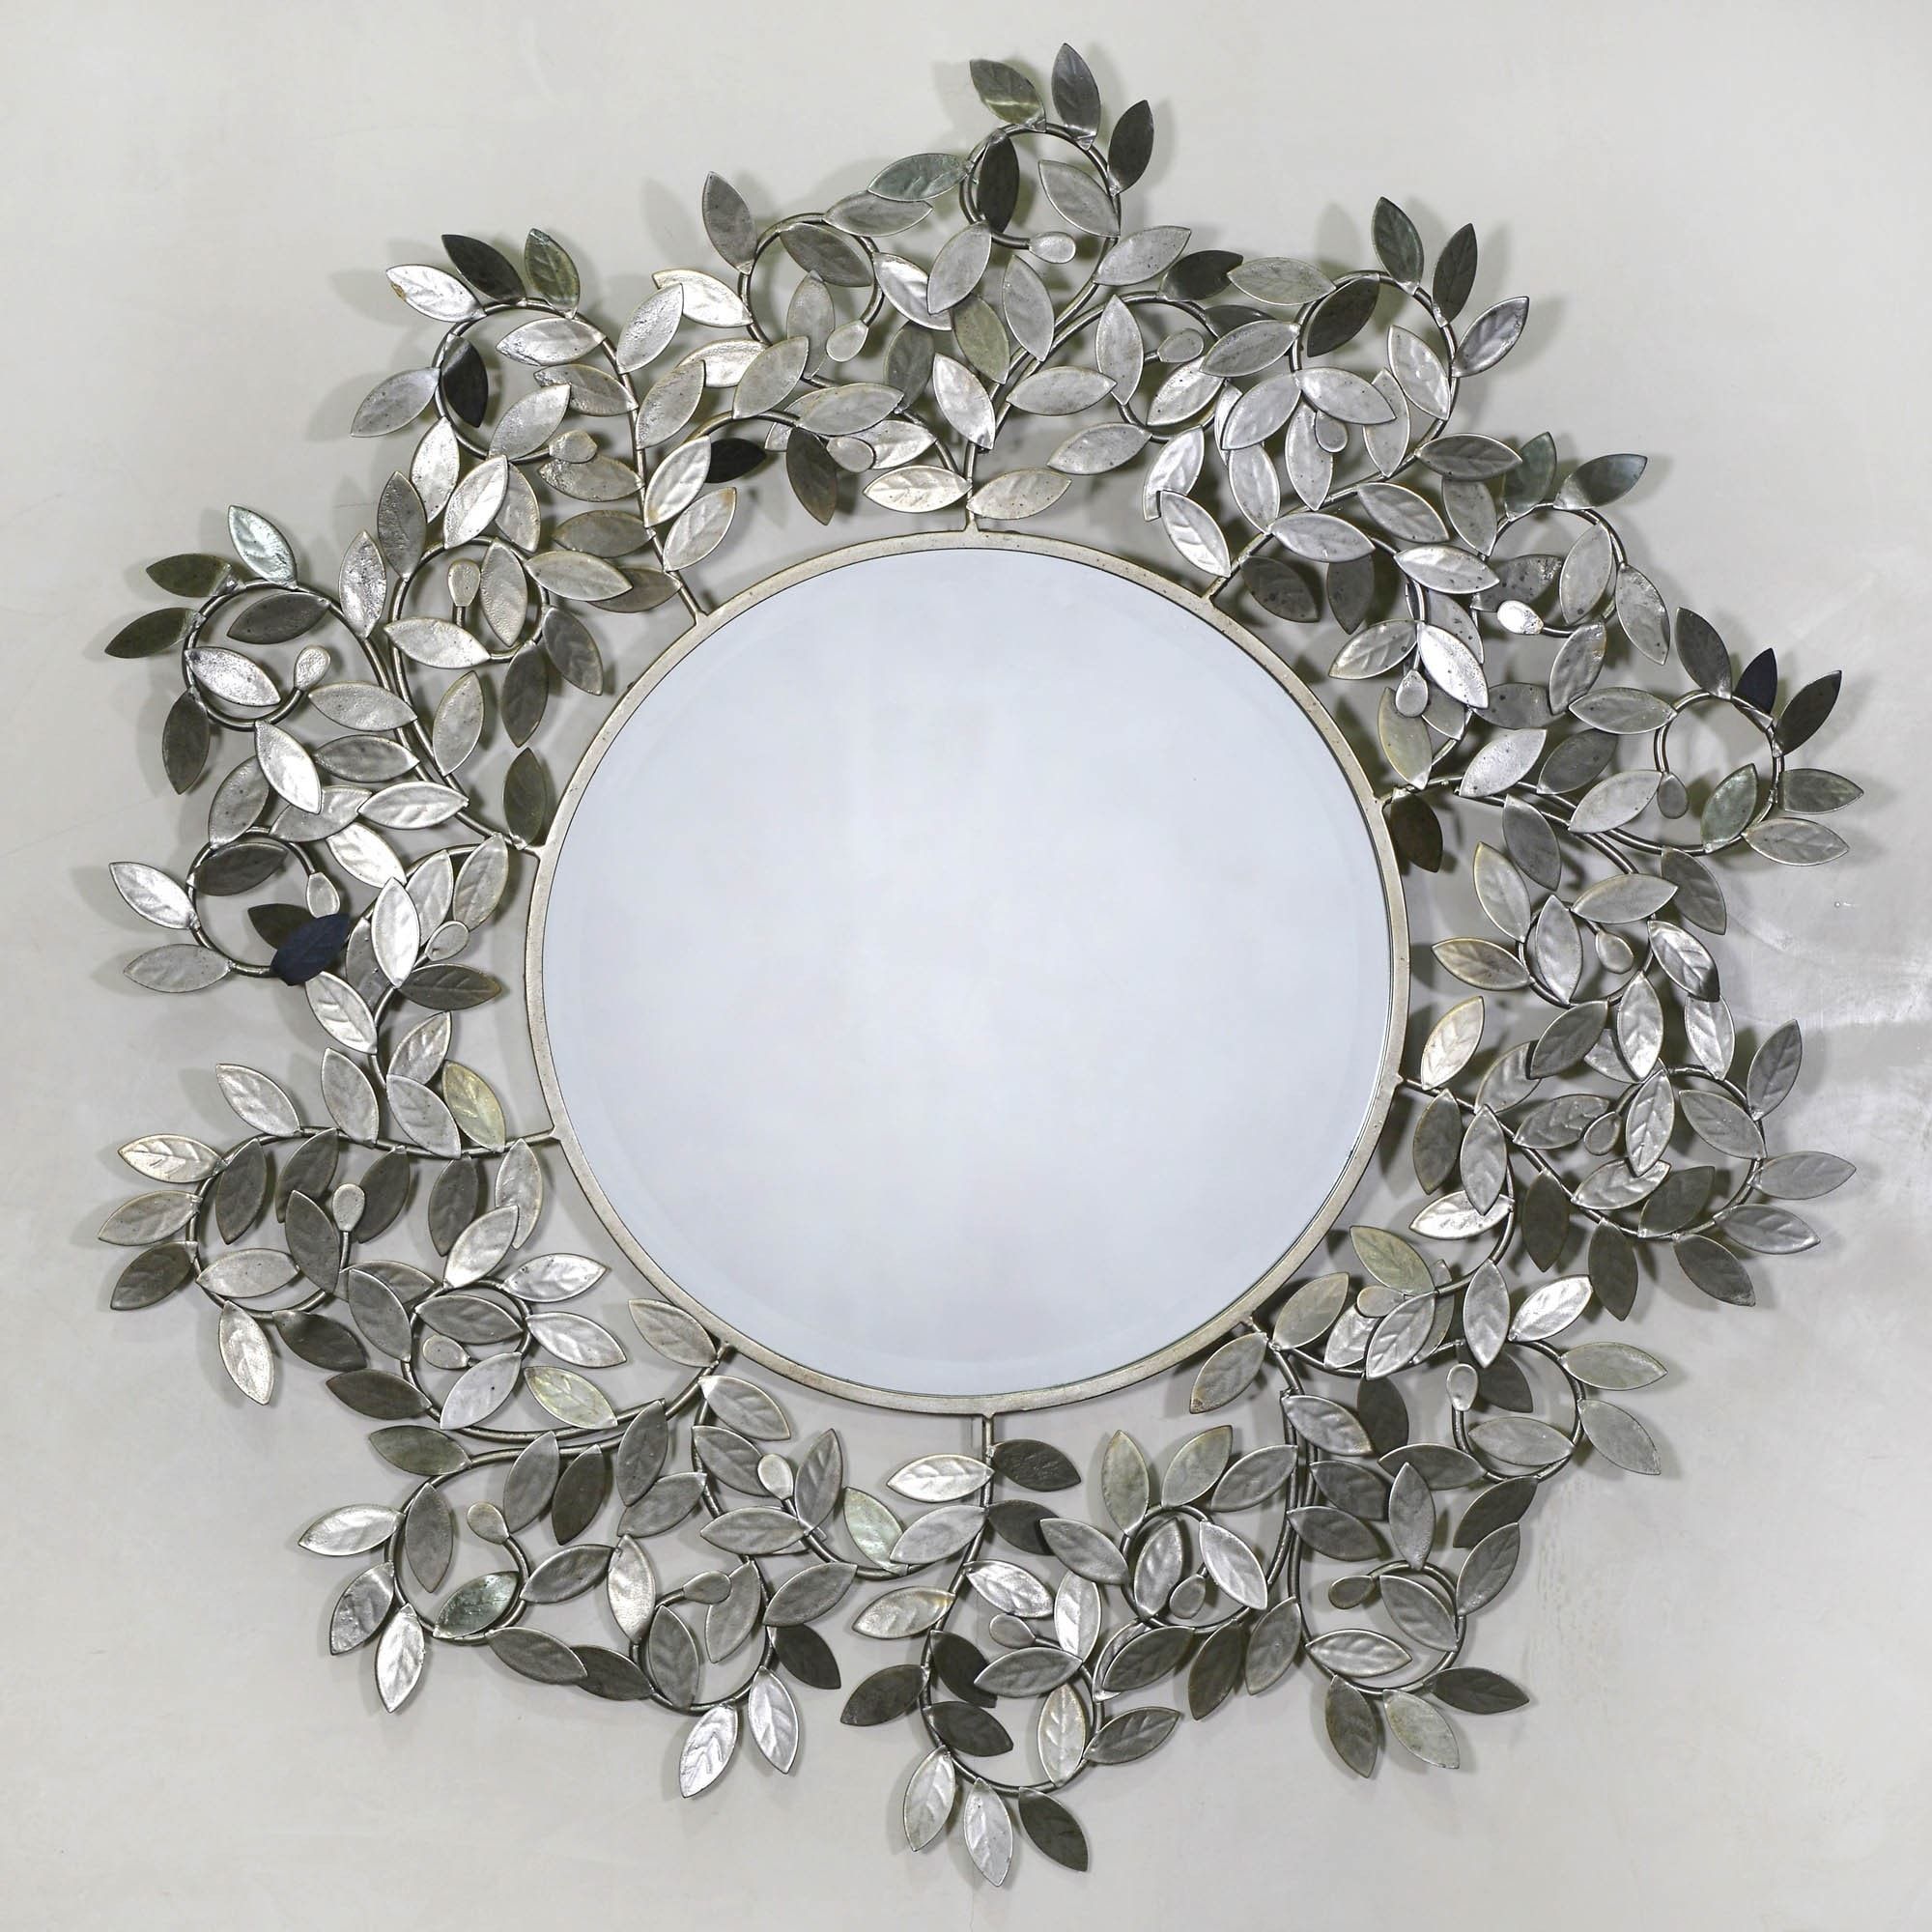 Antique Silver Rose Leaf Metal Framed Wall Mirror | Contemporary Mirror Inside Brass Iron Framed Wall Mirrors (View 7 of 15)